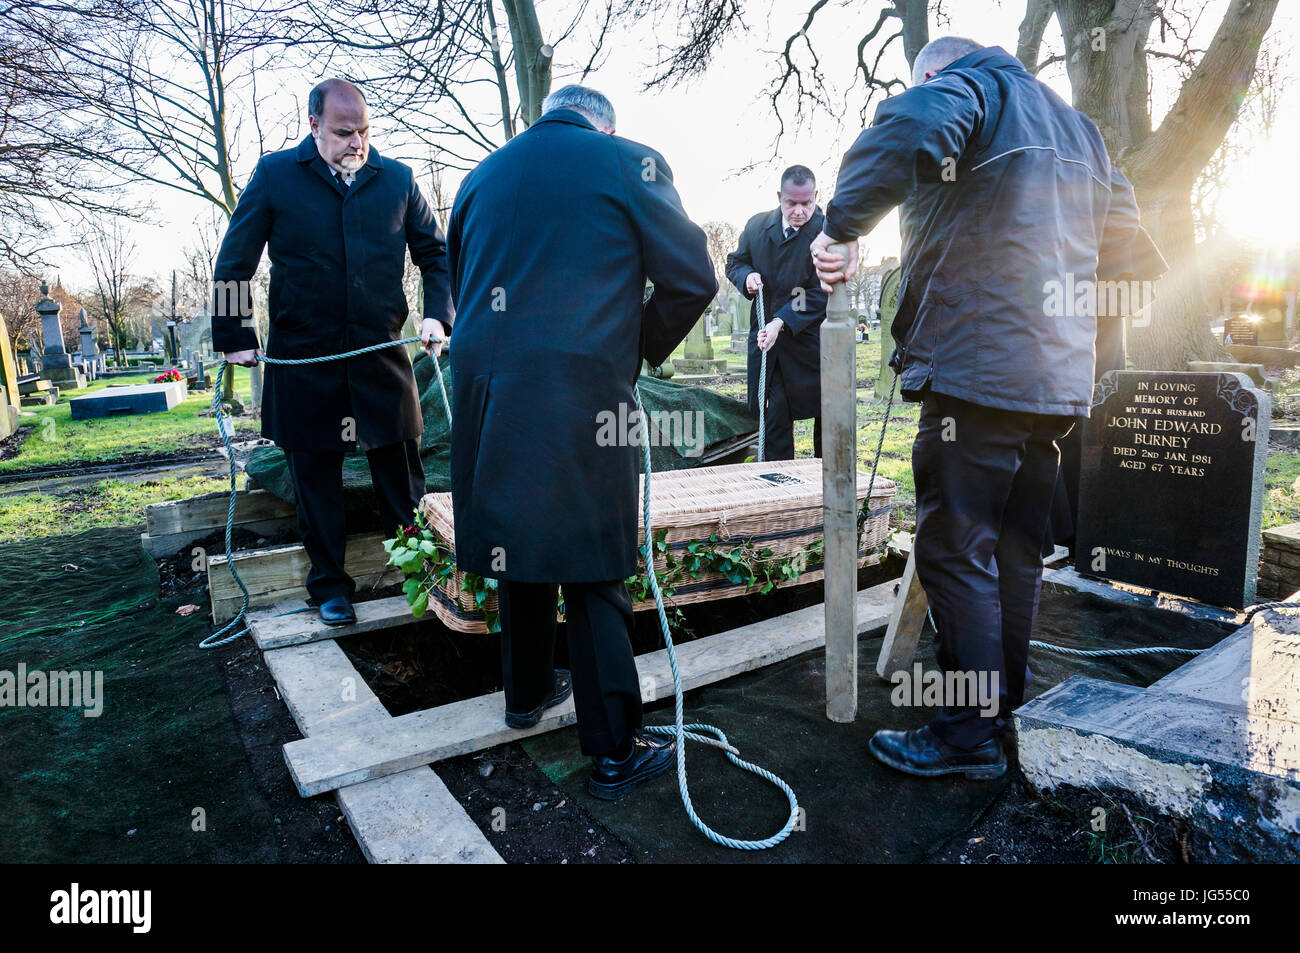 A group of men supporting a wicker coffin with ropes, as it is lowered into a grave, at a cemetery in England, UK. Stock Photo